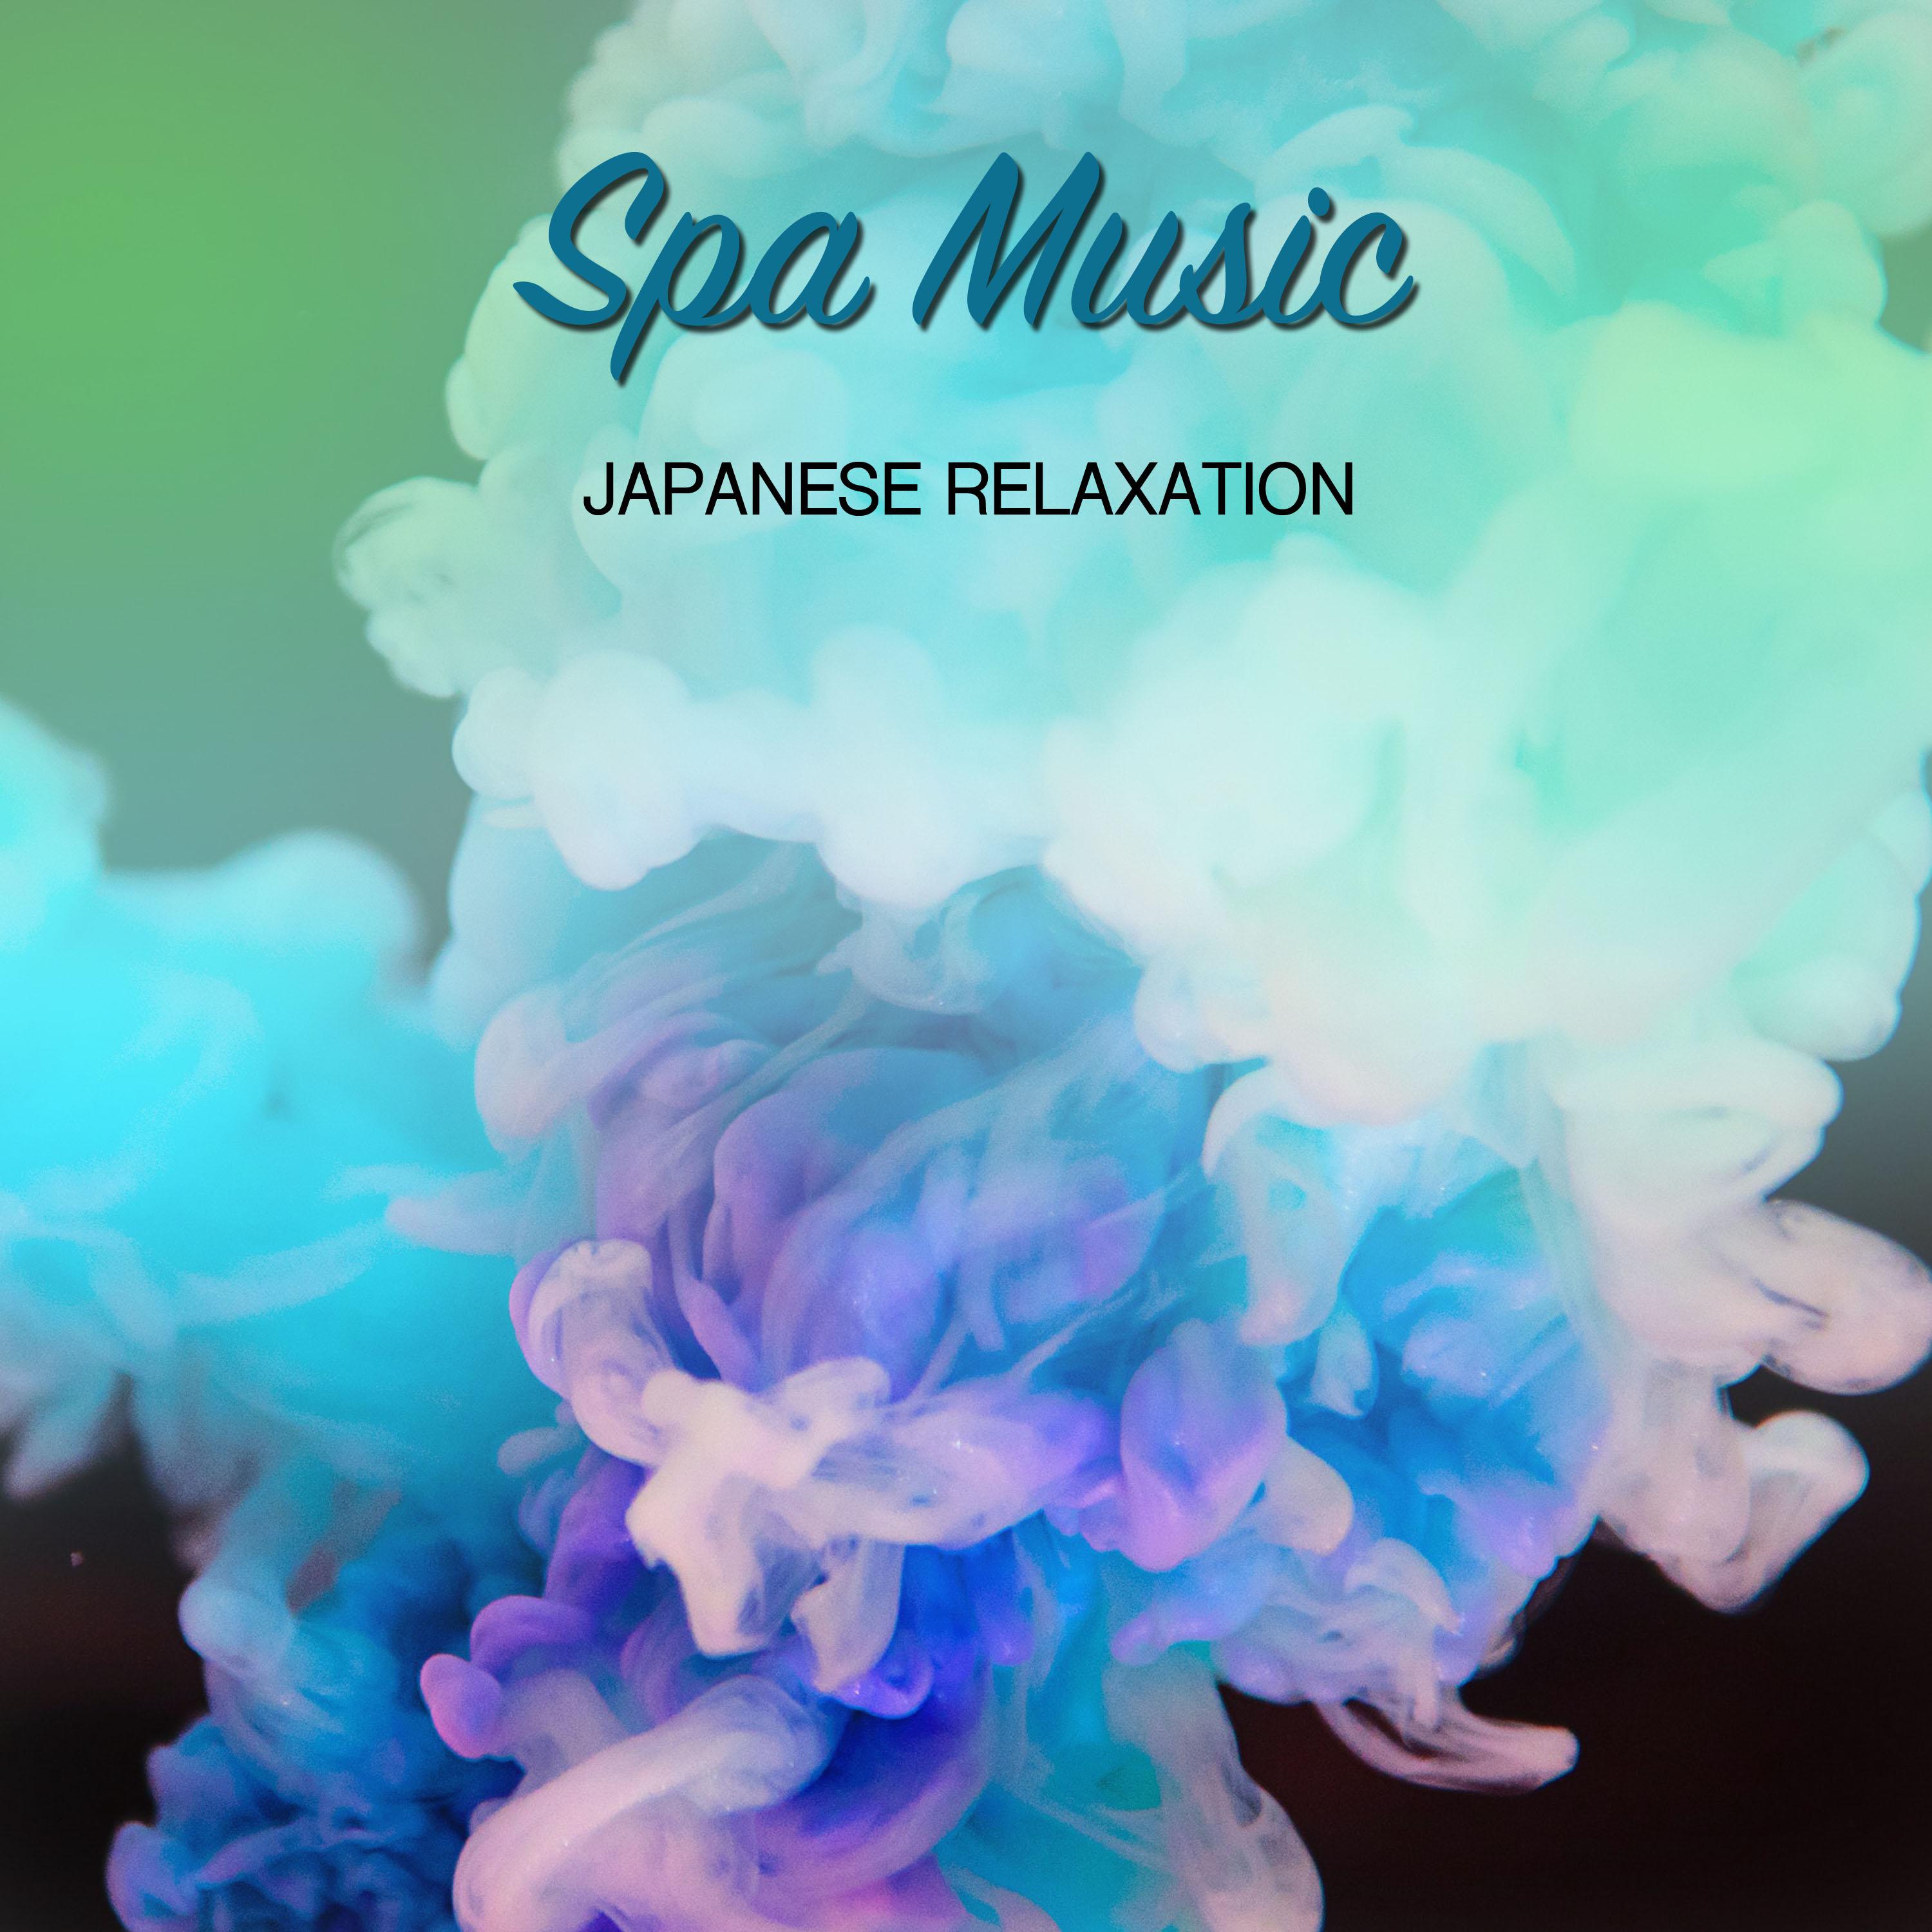 14 Spa Music Tracks: Japanese Relaxation